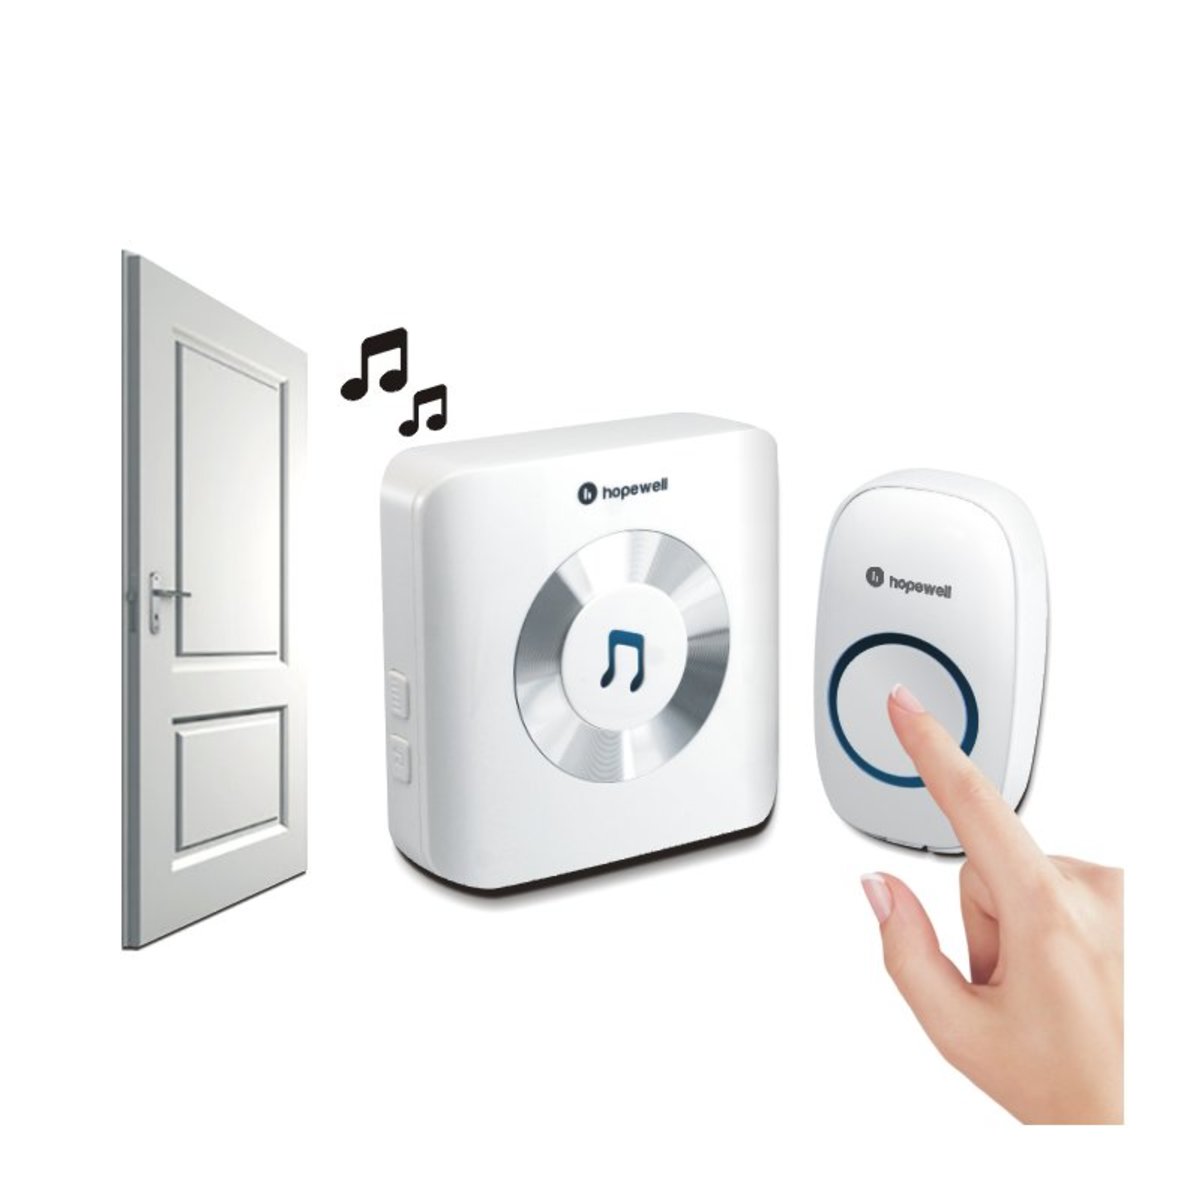 hopewell - DB-6 300m super strong wireless doorbell (plug-in)